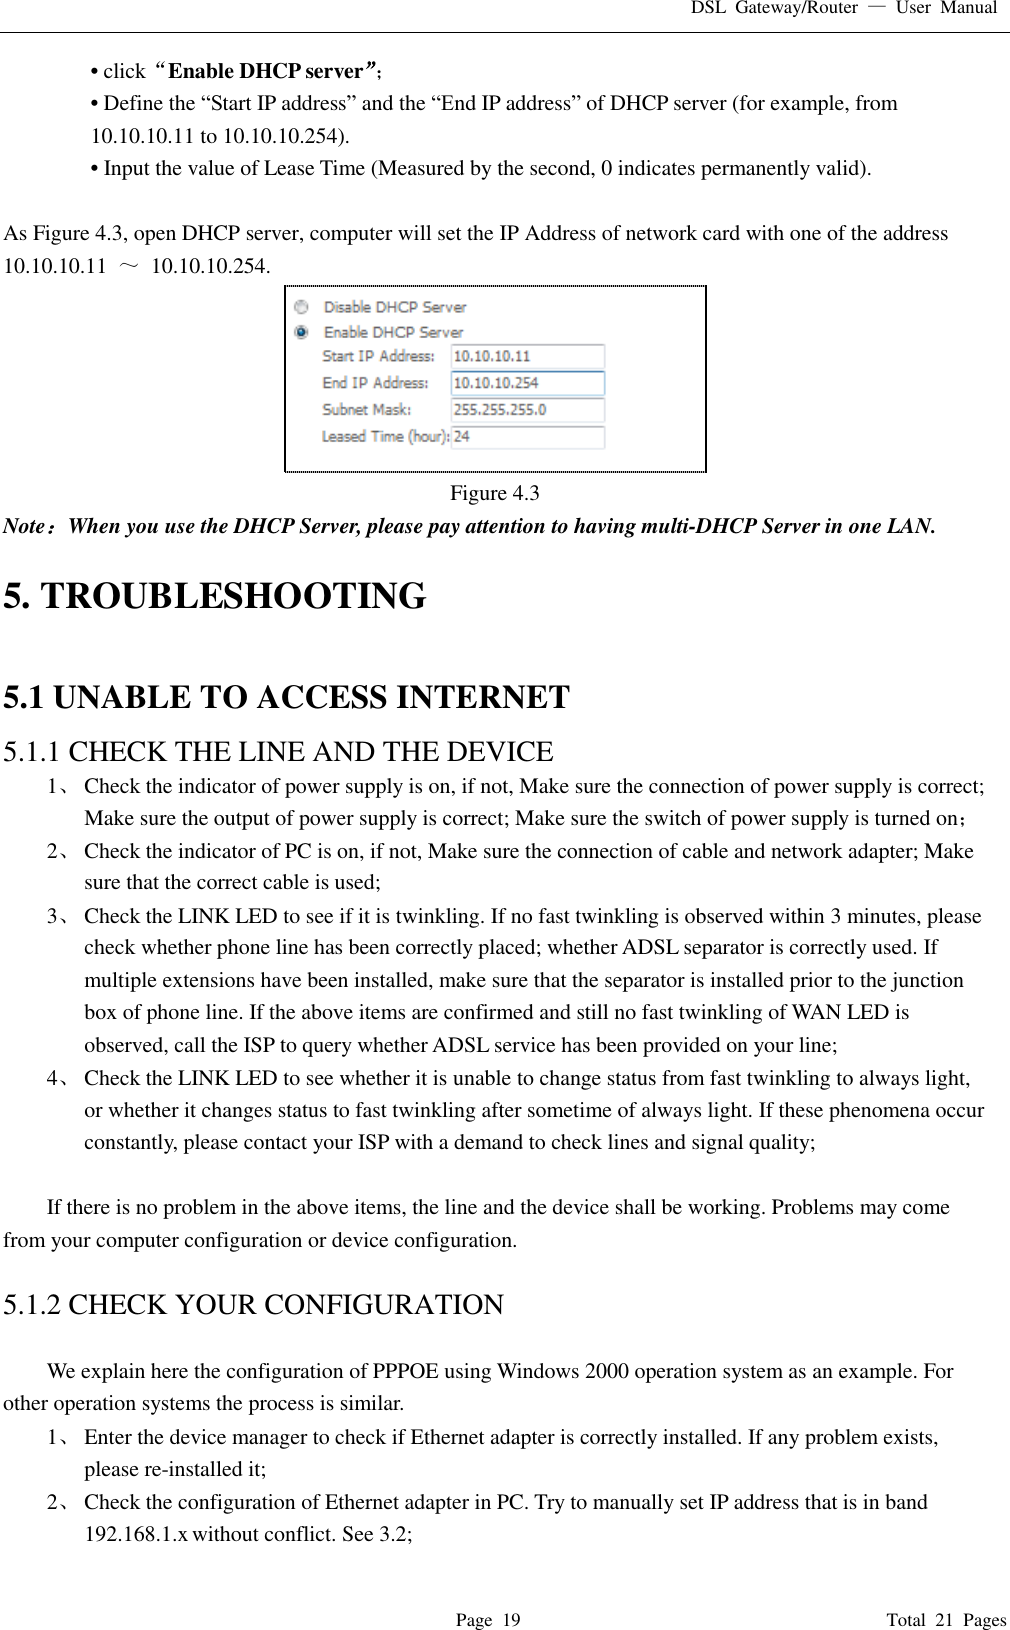 DSL  Gateway/Router  —  User  Manual   Page  19                                                                              Total  21  Pages • click“Enable DHCP server”； • Define the “Start IP address” and the “End IP address” of DHCP server (for example, from 10.10.10.11 to 10.10.10.254).   • Input the value of Lease Time (Measured by the second, 0 indicates permanently valid).    As Figure 4.3, open DHCP server, computer will set the IP Address of network card with one of the address   10.10.10.11  ～  10.10.10.254.  Figure 4.3 Note：When you use the DHCP Server, please pay attention to having multi-DHCP Server in one LAN.    5. TROUBLESHOOTING  5.1 UNABLE TO ACCESS INTERNET 5.1.1 CHECK THE LINE AND THE DEVICE 1、 Check the indicator of power supply is on, if not, Make sure the connection of power supply is correct; Make sure the output of power supply is correct; Make sure the switch of power supply is turned on； 2、 Check the indicator of PC is on, if not, Make sure the connection of cable and network adapter; Make sure that the correct cable is used; 3、 Check the LINK LED to see if it is twinkling. If no fast twinkling is observed within 3 minutes, please check whether phone line has been correctly placed; whether ADSL separator is correctly used. If multiple extensions have been installed, make sure that the separator is installed prior to the junction box of phone line. If the above items are confirmed and still no fast twinkling of WAN LED is observed, call the ISP to query whether ADSL service has been provided on your line; 4、 Check the LINK LED to see whether it is unable to change status from fast twinkling to always light, or whether it changes status to fast twinkling after sometime of always light. If these phenomena occur constantly, please contact your ISP with a demand to check lines and signal quality;  If there is no problem in the above items, the line and the device shall be working. Problems may come from your computer configuration or device configuration.  5.1.2 CHECK YOUR CONFIGURATION  We explain here the configuration of PPPOE using Windows 2000 operation system as an example. For other operation systems the process is similar. 1、 Enter the device manager to check if Ethernet adapter is correctly installed. If any problem exists, please re-installed it; 2、 Check the configuration of Ethernet adapter in PC. Try to manually set IP address that is in band 192.168.1.x without conflict. See 3.2; 